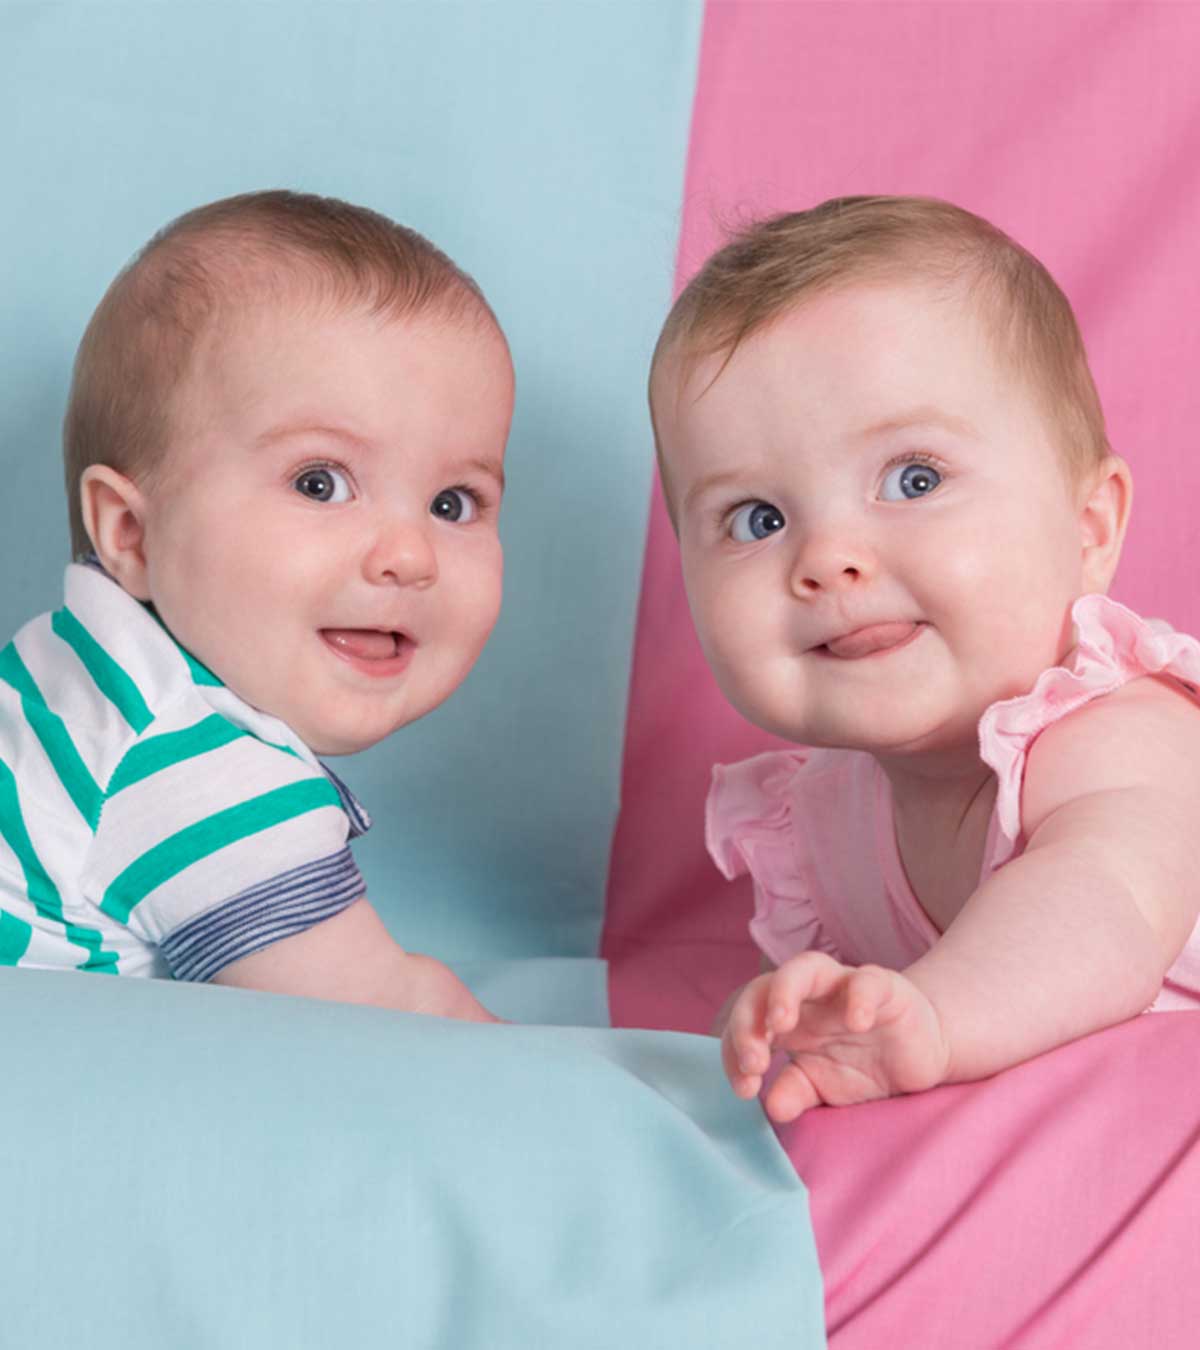 Fierce Gender-Neutral Baby Names That You